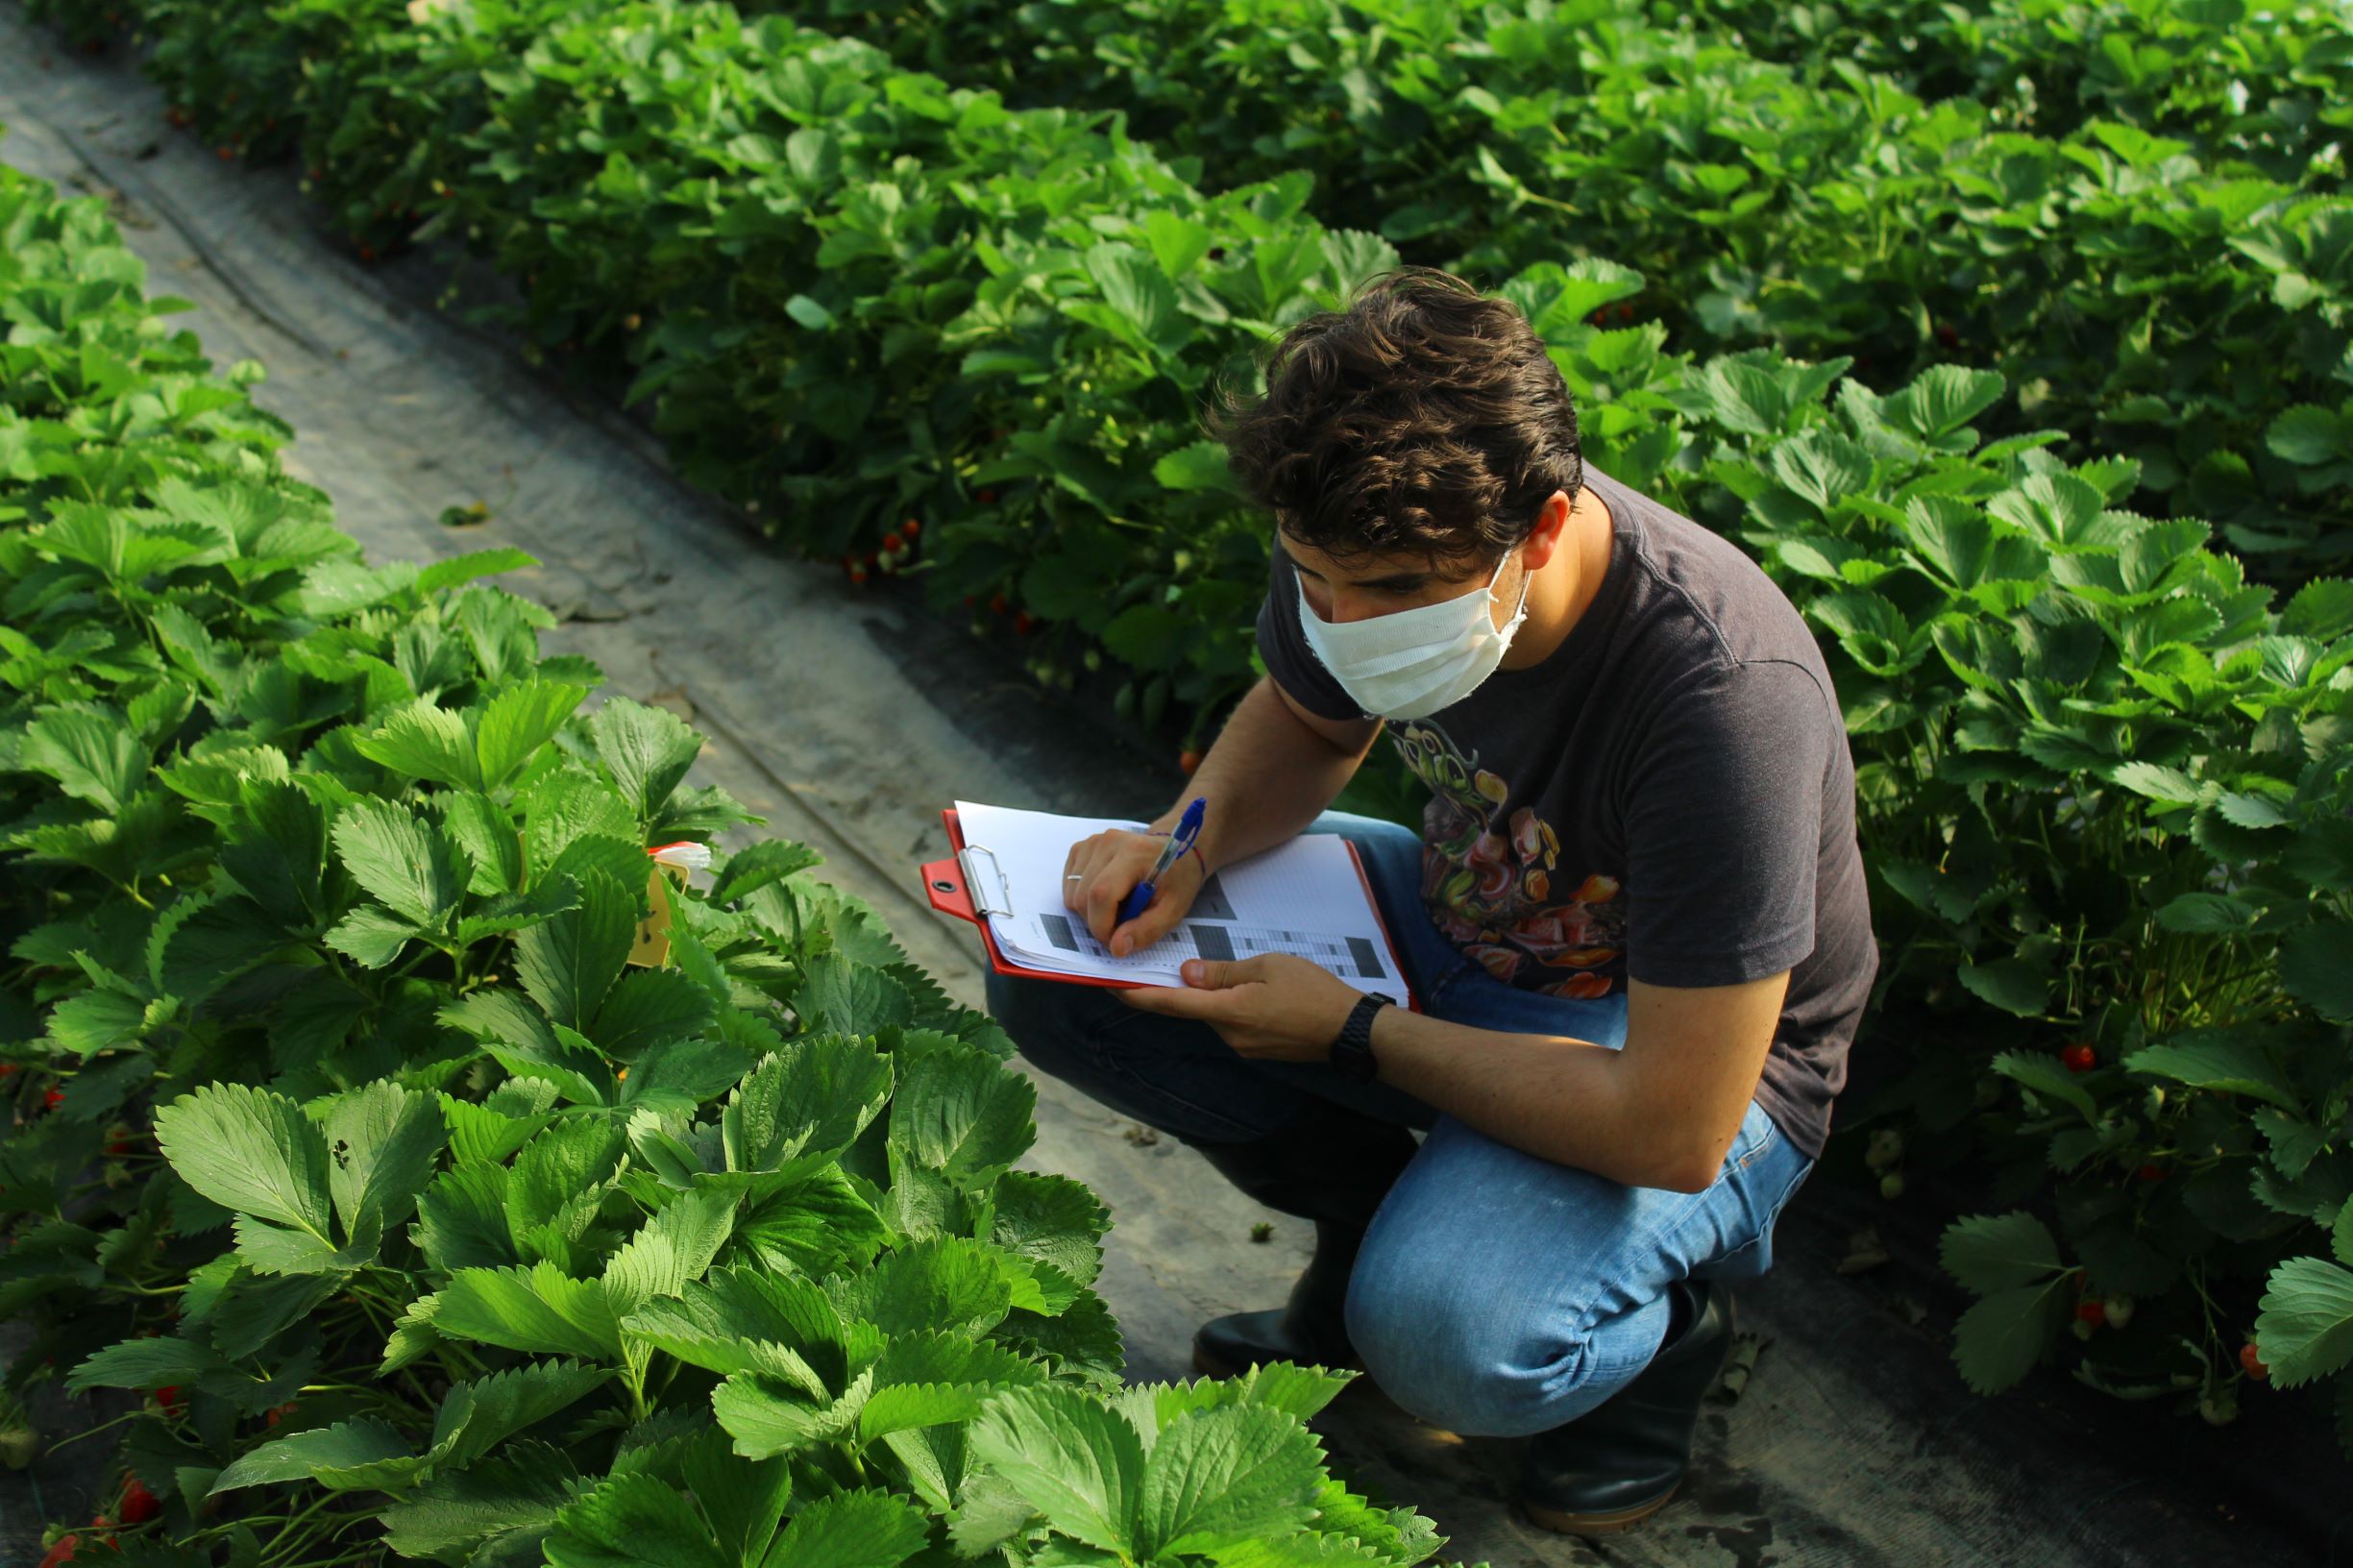 Assessment of strawberry plants for pests and pathogens